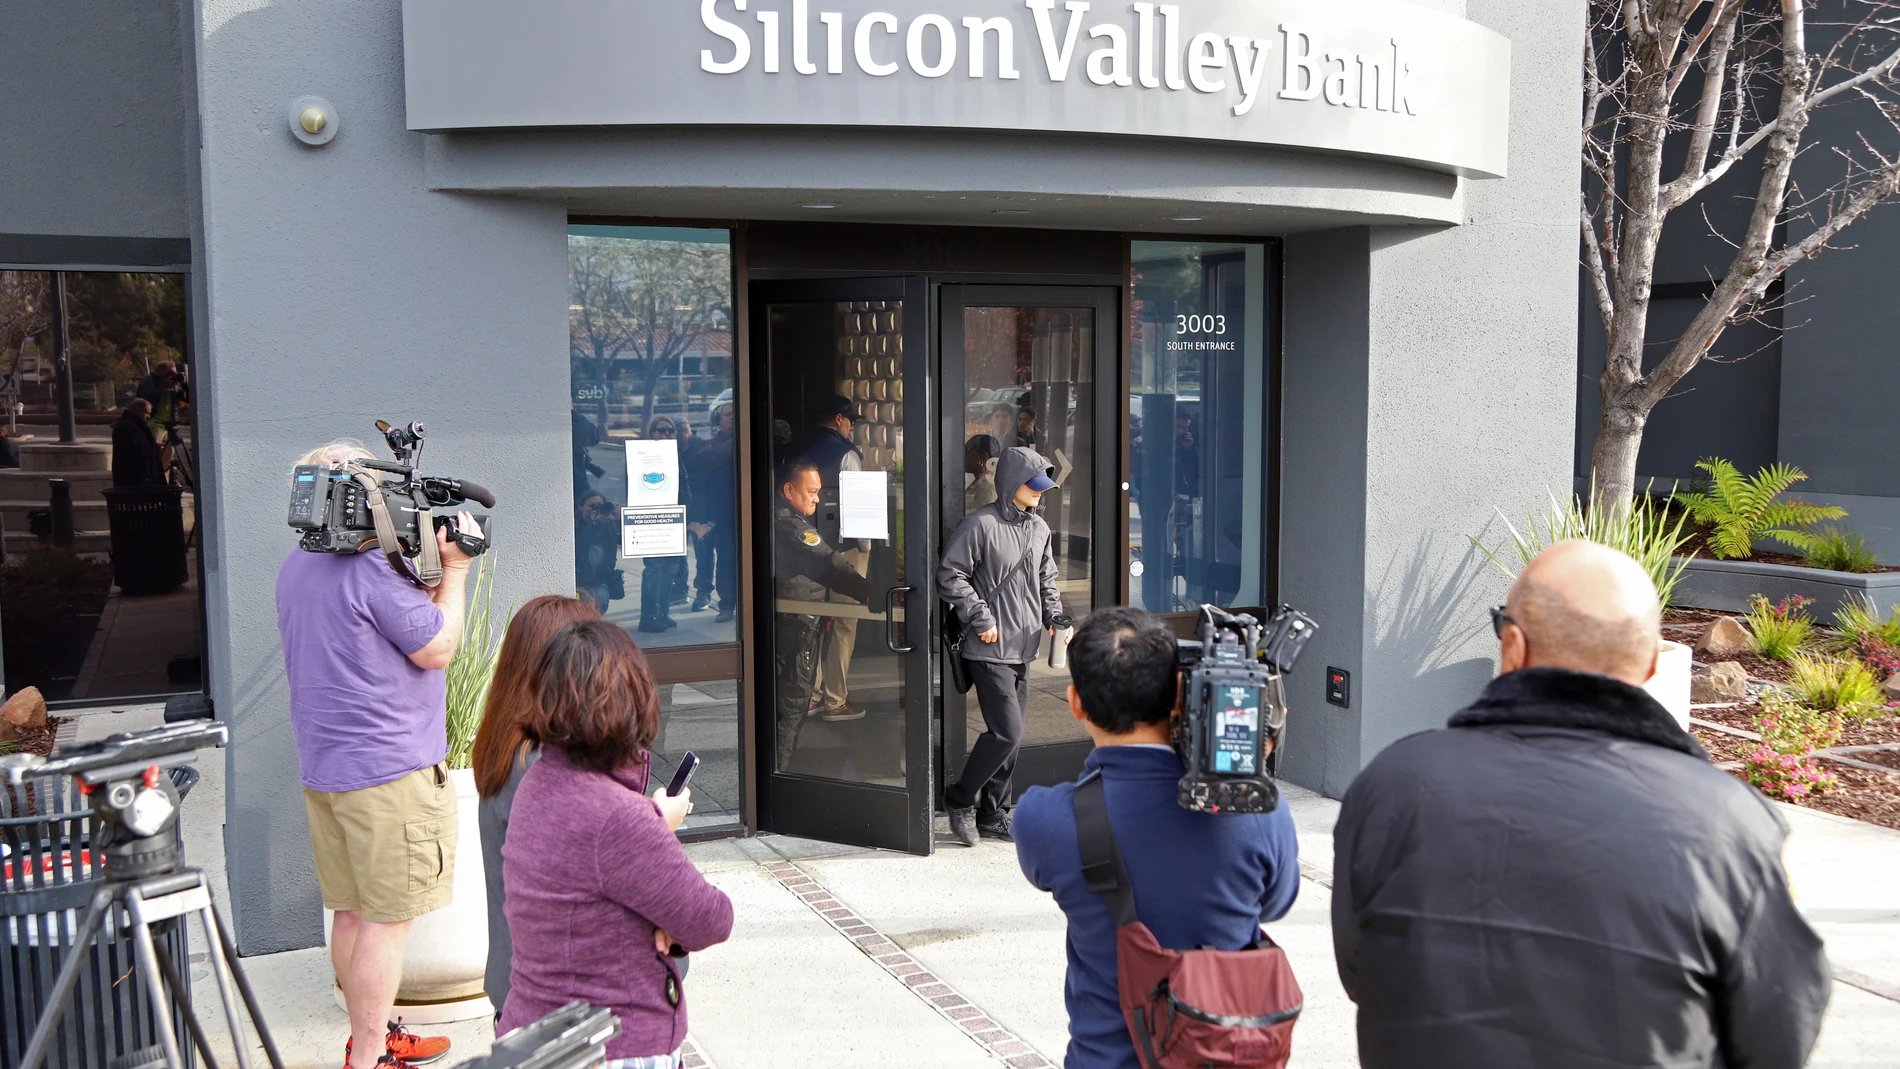 Santa Clara (United States), 13/03/2023.- A customer leaves the headquarters of Silicon Valley Bank (SVB) in Santa Clara, California, USA, 13 March 2023. The Federal Deposit Insurance Corporation (FDIC) took control of the bank's assets, making it the largest bank to do so since the 2008 finical crisis. (Estados Unidos) EFE/EPA/GEORGE NIKITIN 